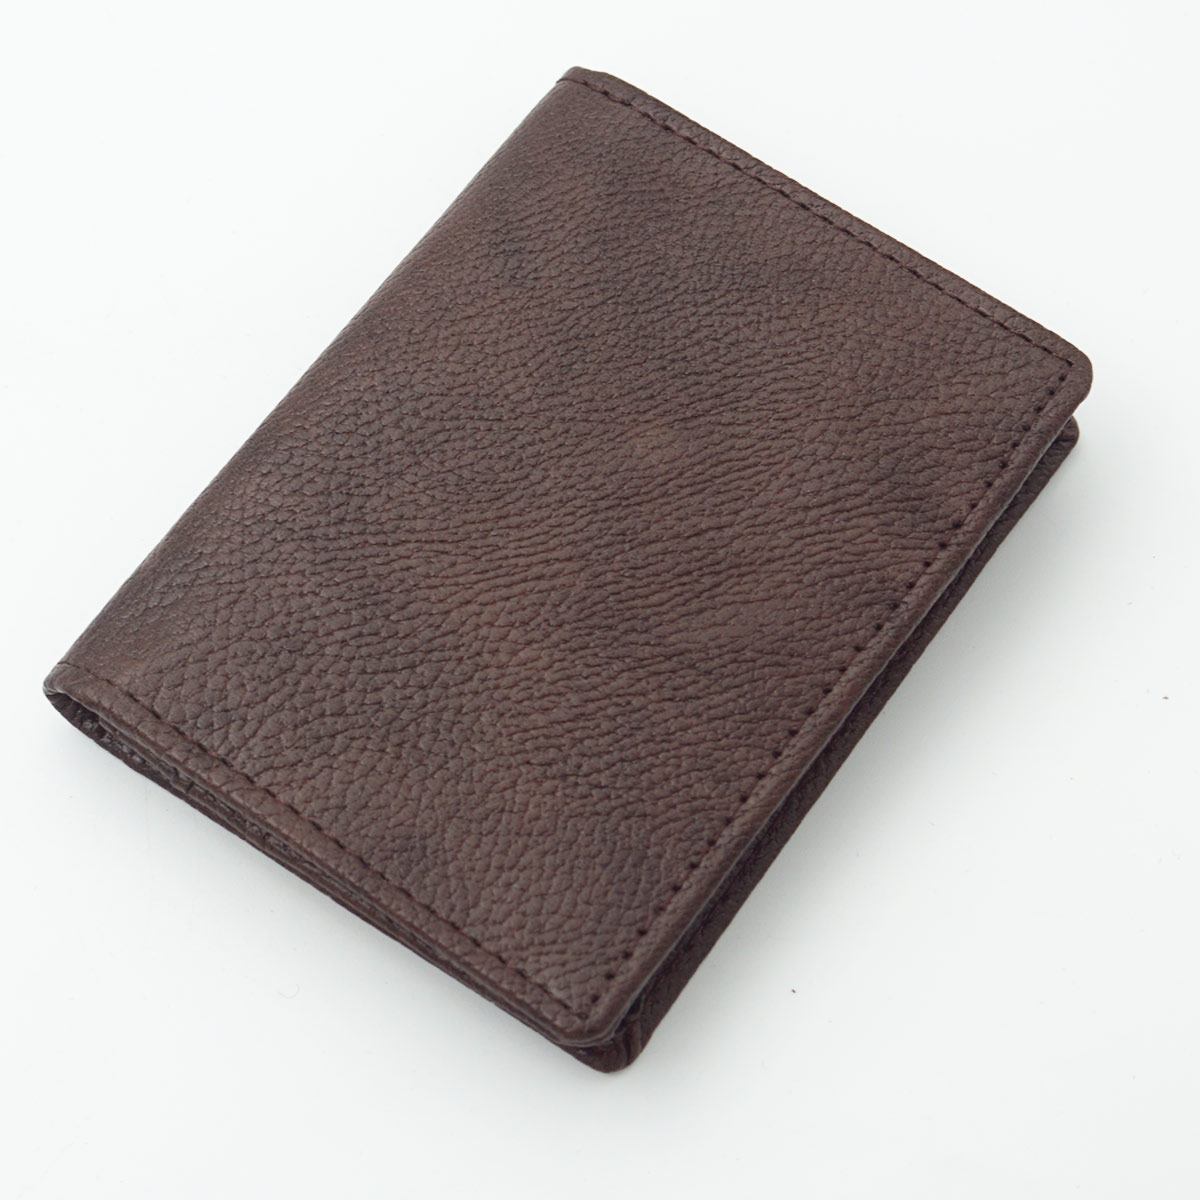 penhouse.in Dark Brown Color Leather With Open Type Card Holder SKU 87205